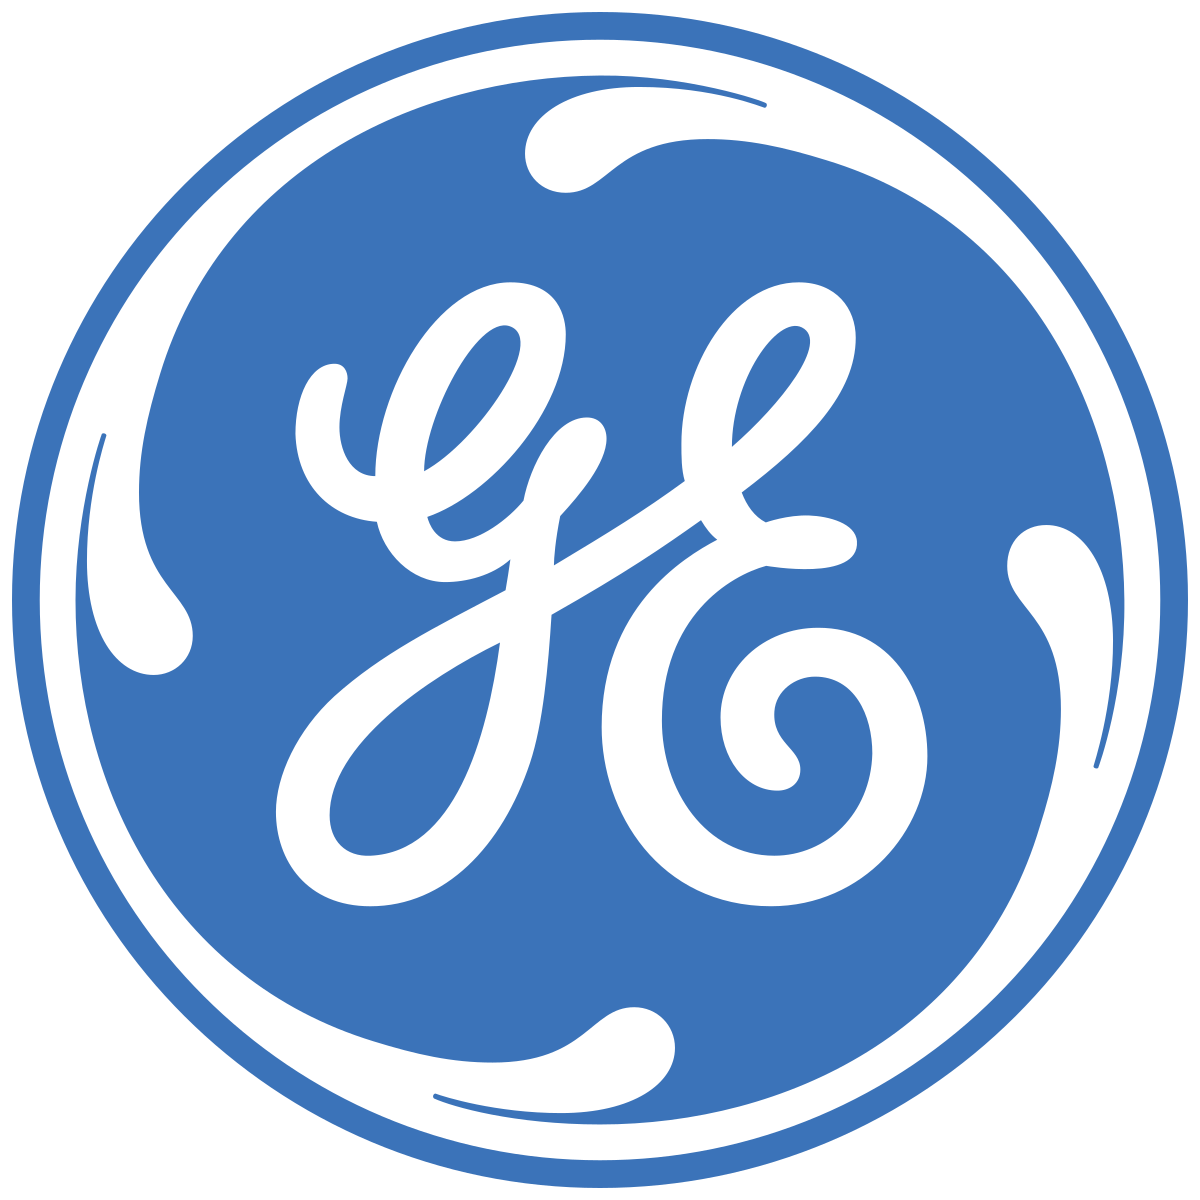 general-electric.png